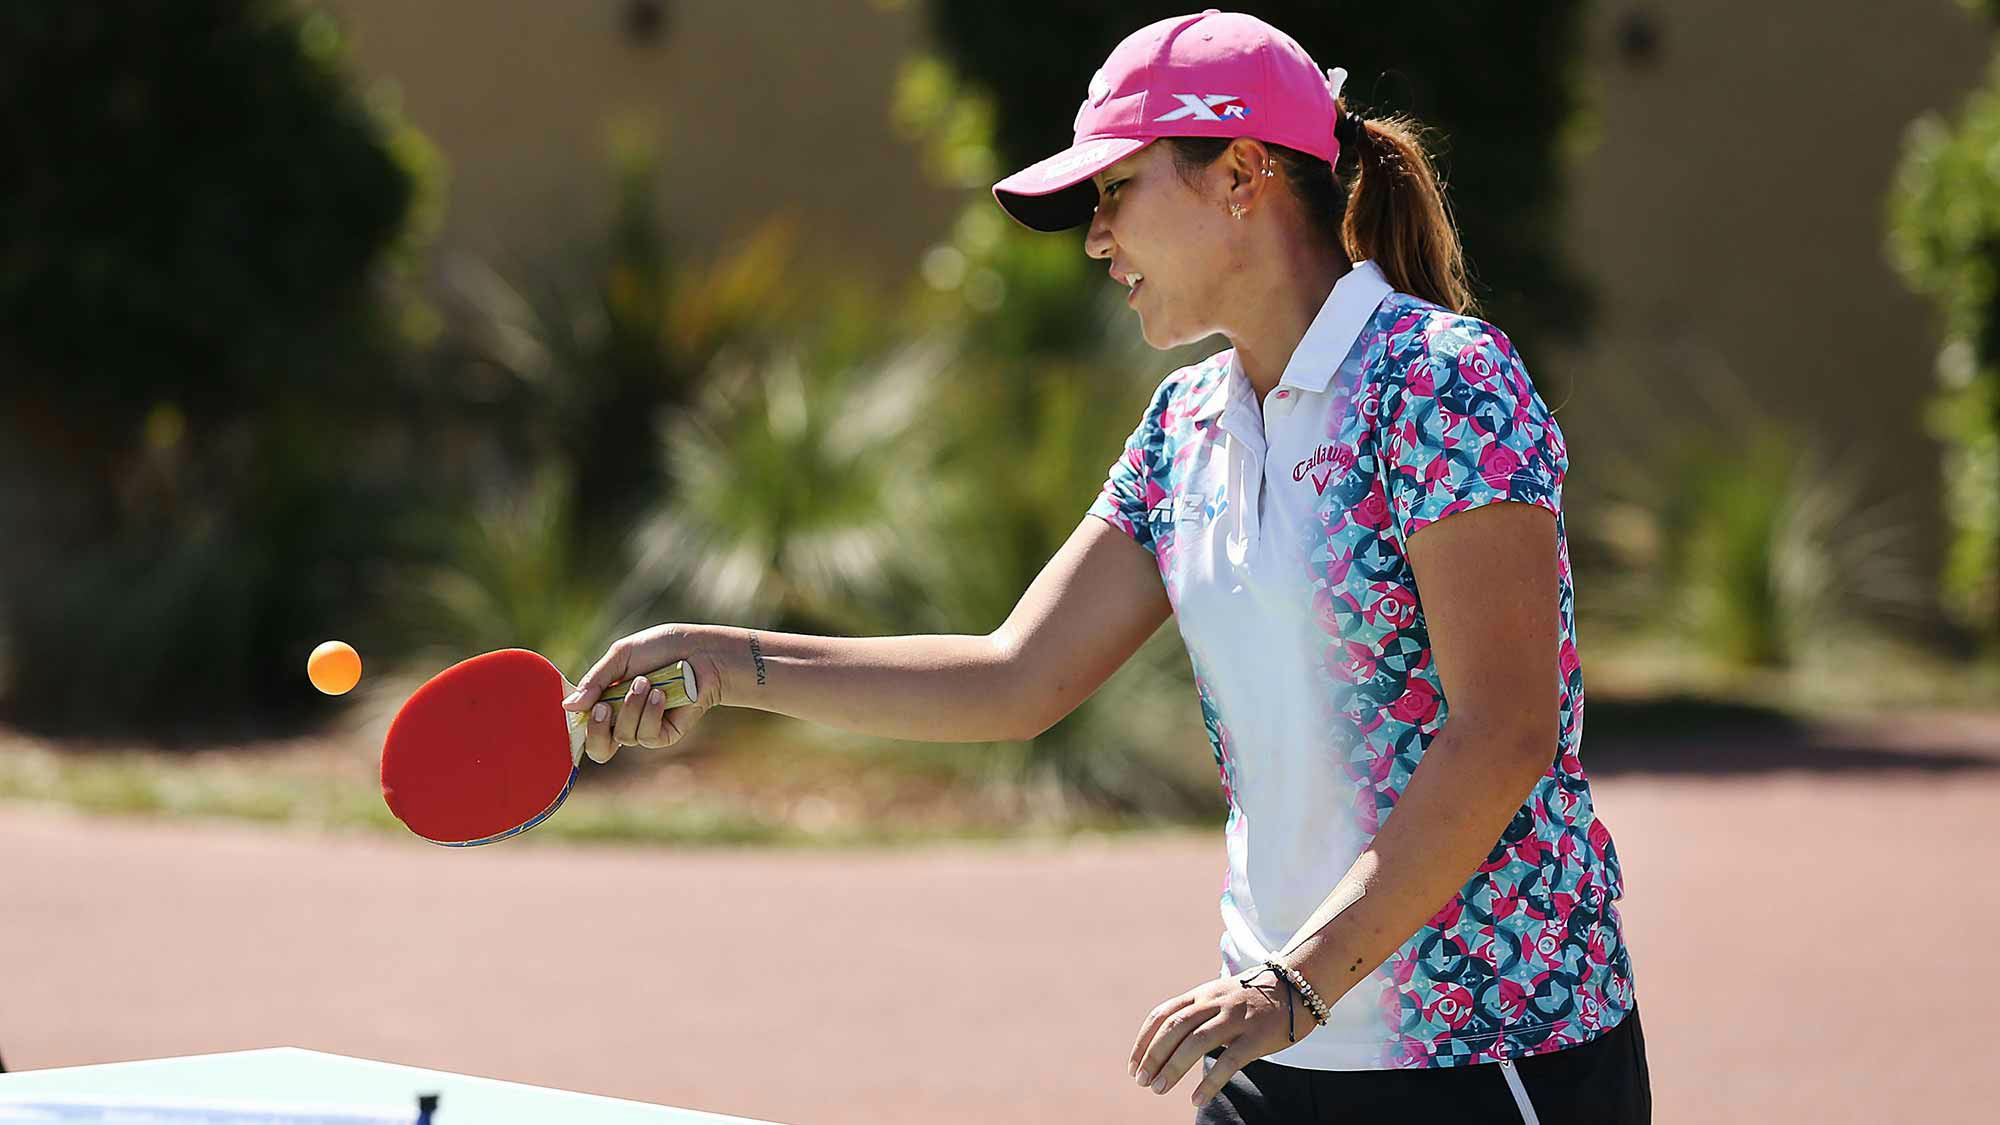 Lydia Ko plays ping-pong after her round at the ISPS Handa Women's Australian Open - Day 2